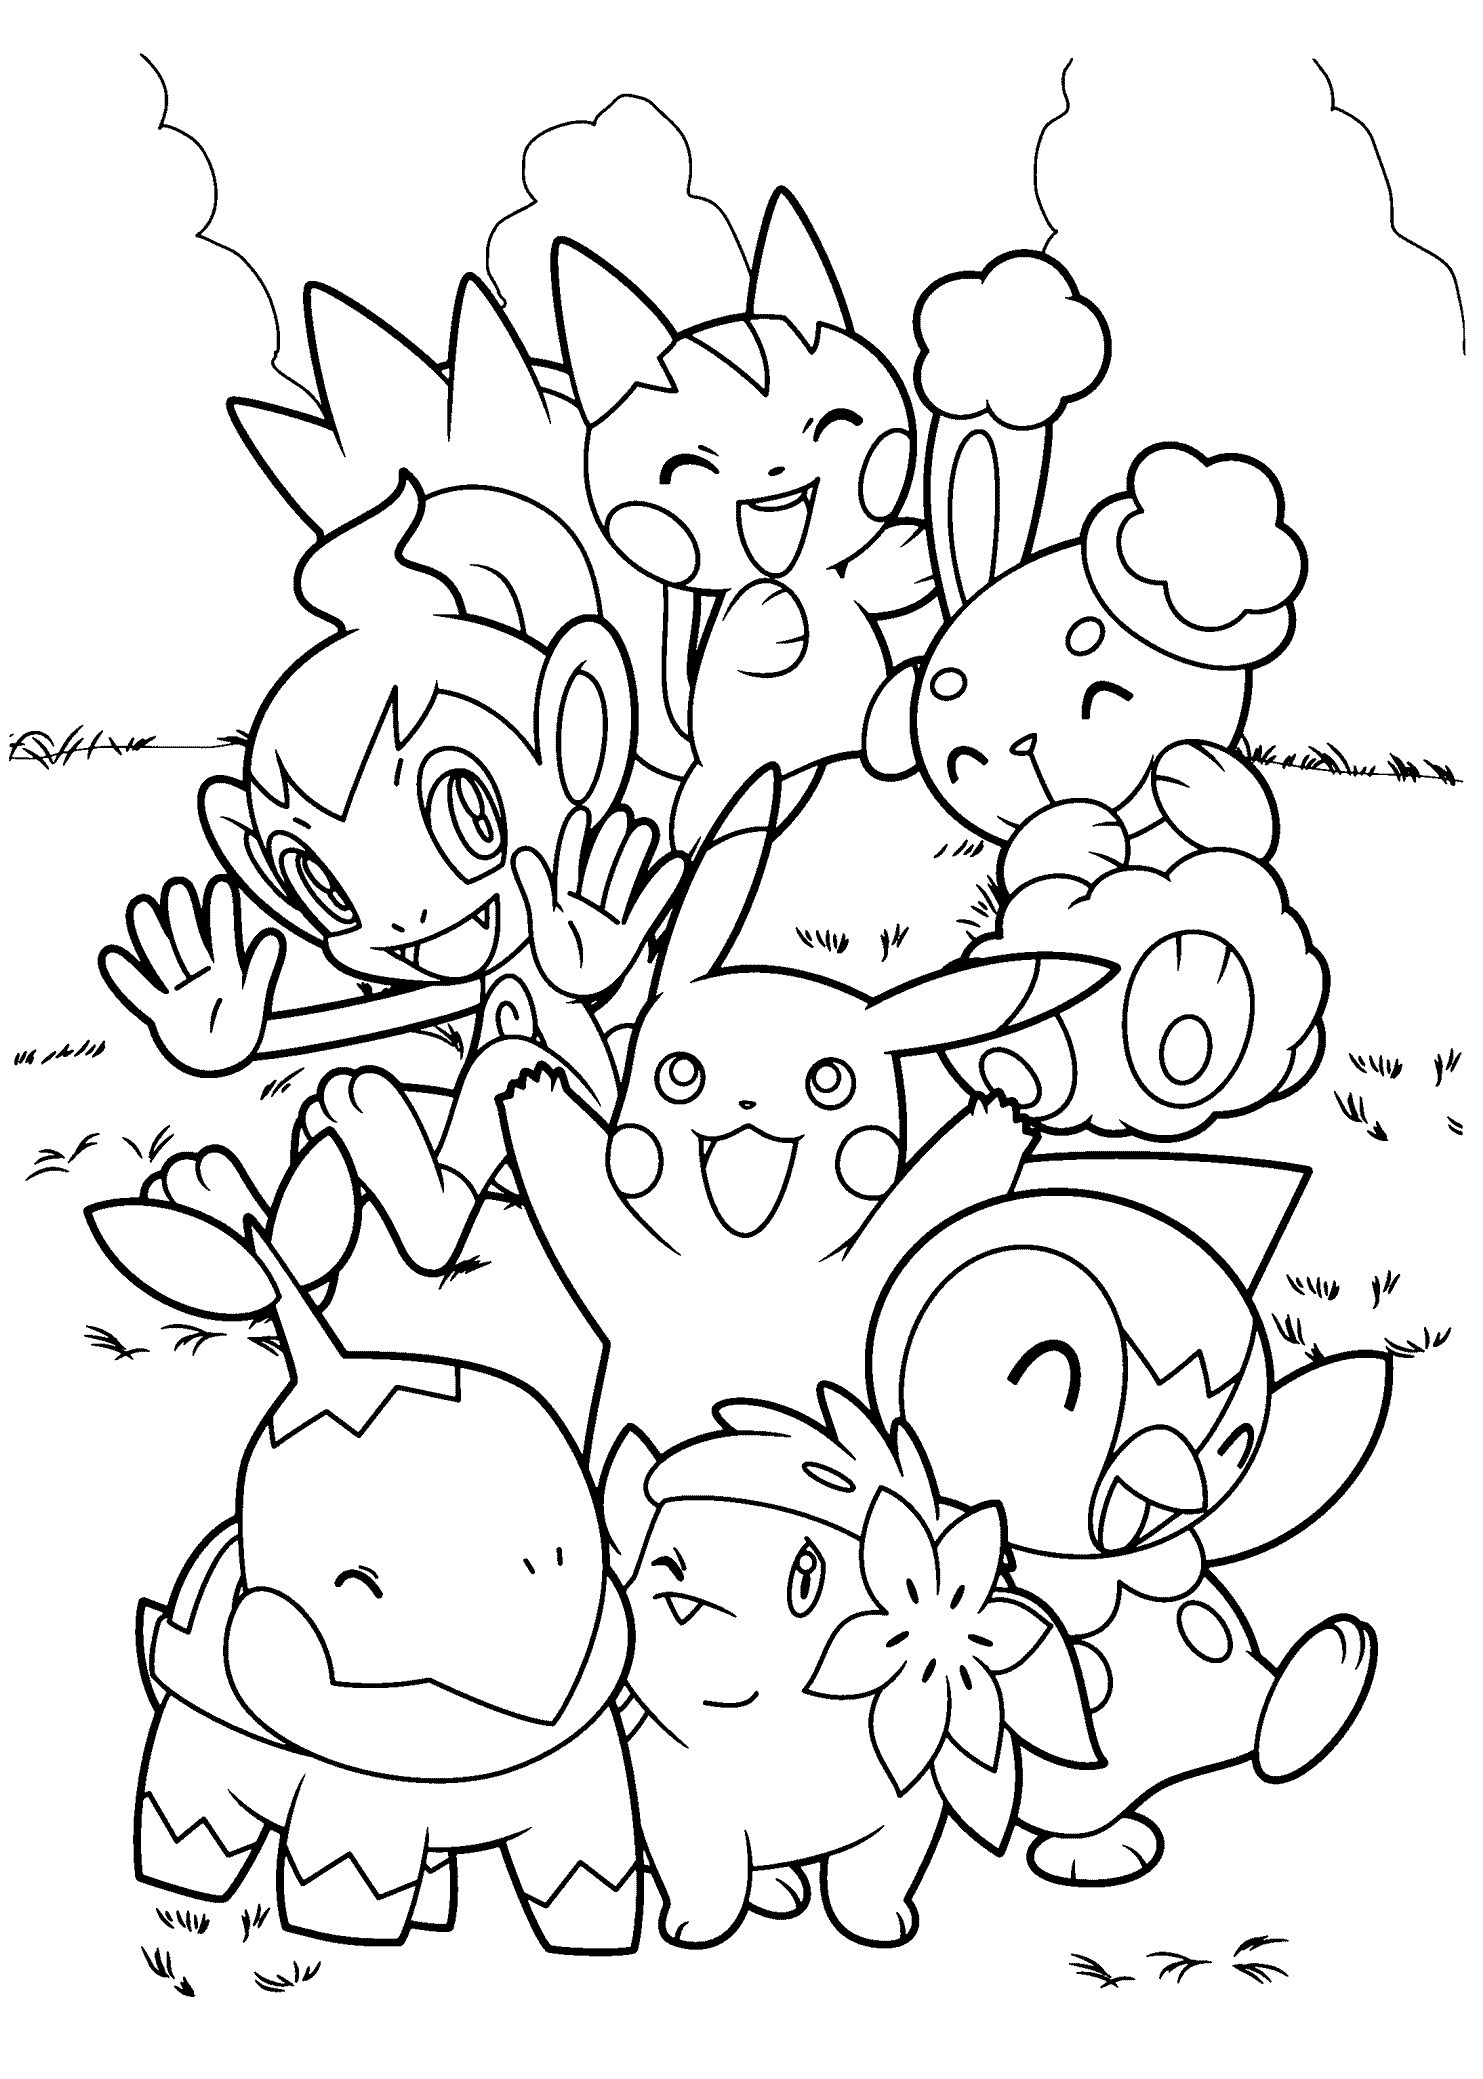 Coloring Book Print Out Fresh top 75 Free Printable Pokemon Coloring Pages Line